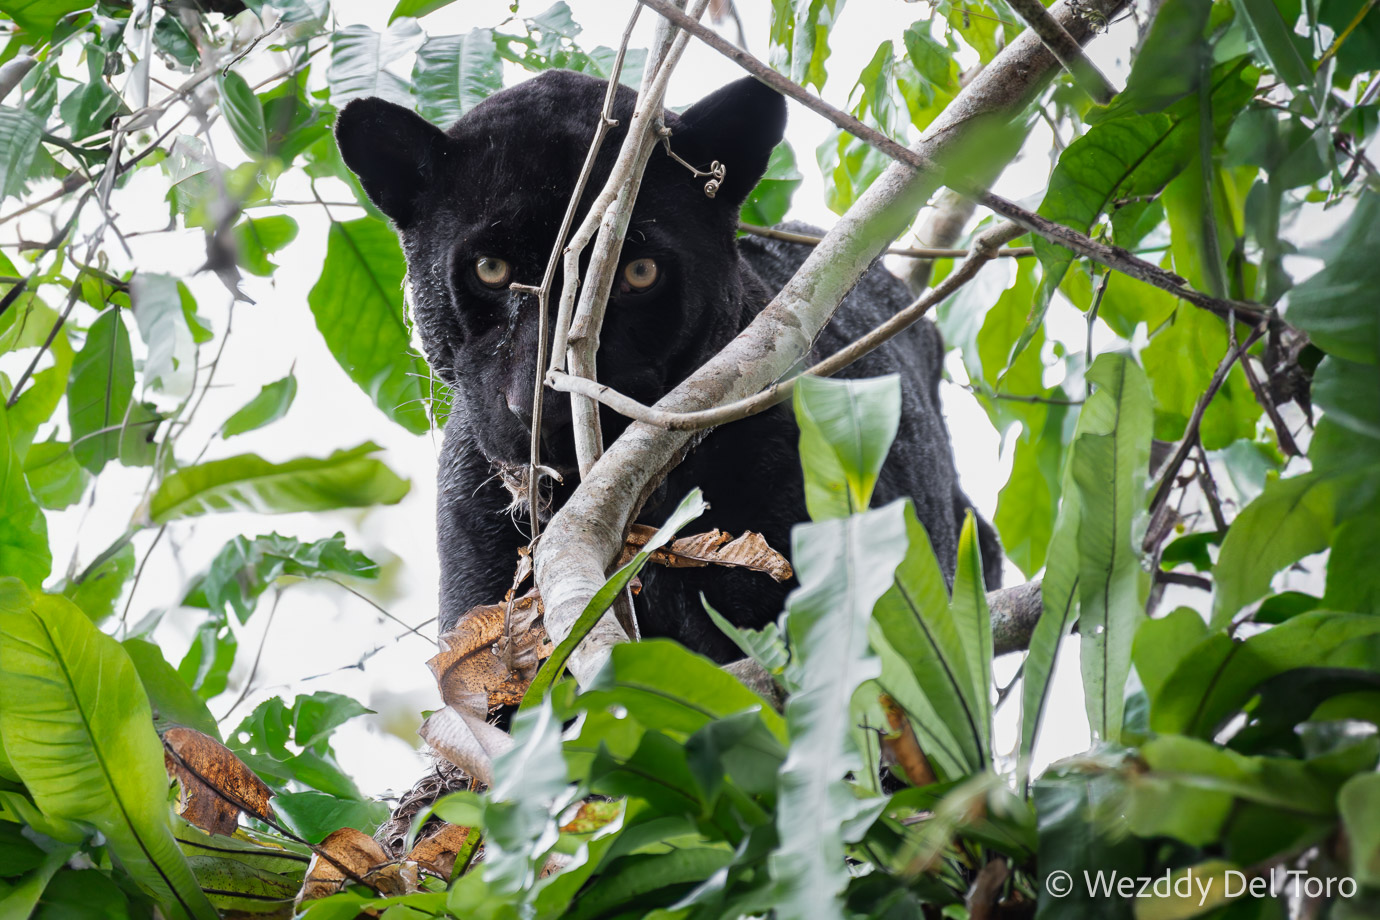 Male melanistic jaguar (“onça-preta” Panthera onca) on top of a tree, eating a sloth (“preguiça," Bradypus variegatus) during the flooded season. Notice some of the sloth’s hair in the jaguar’s mouth and the sloth carcass at the bottom.